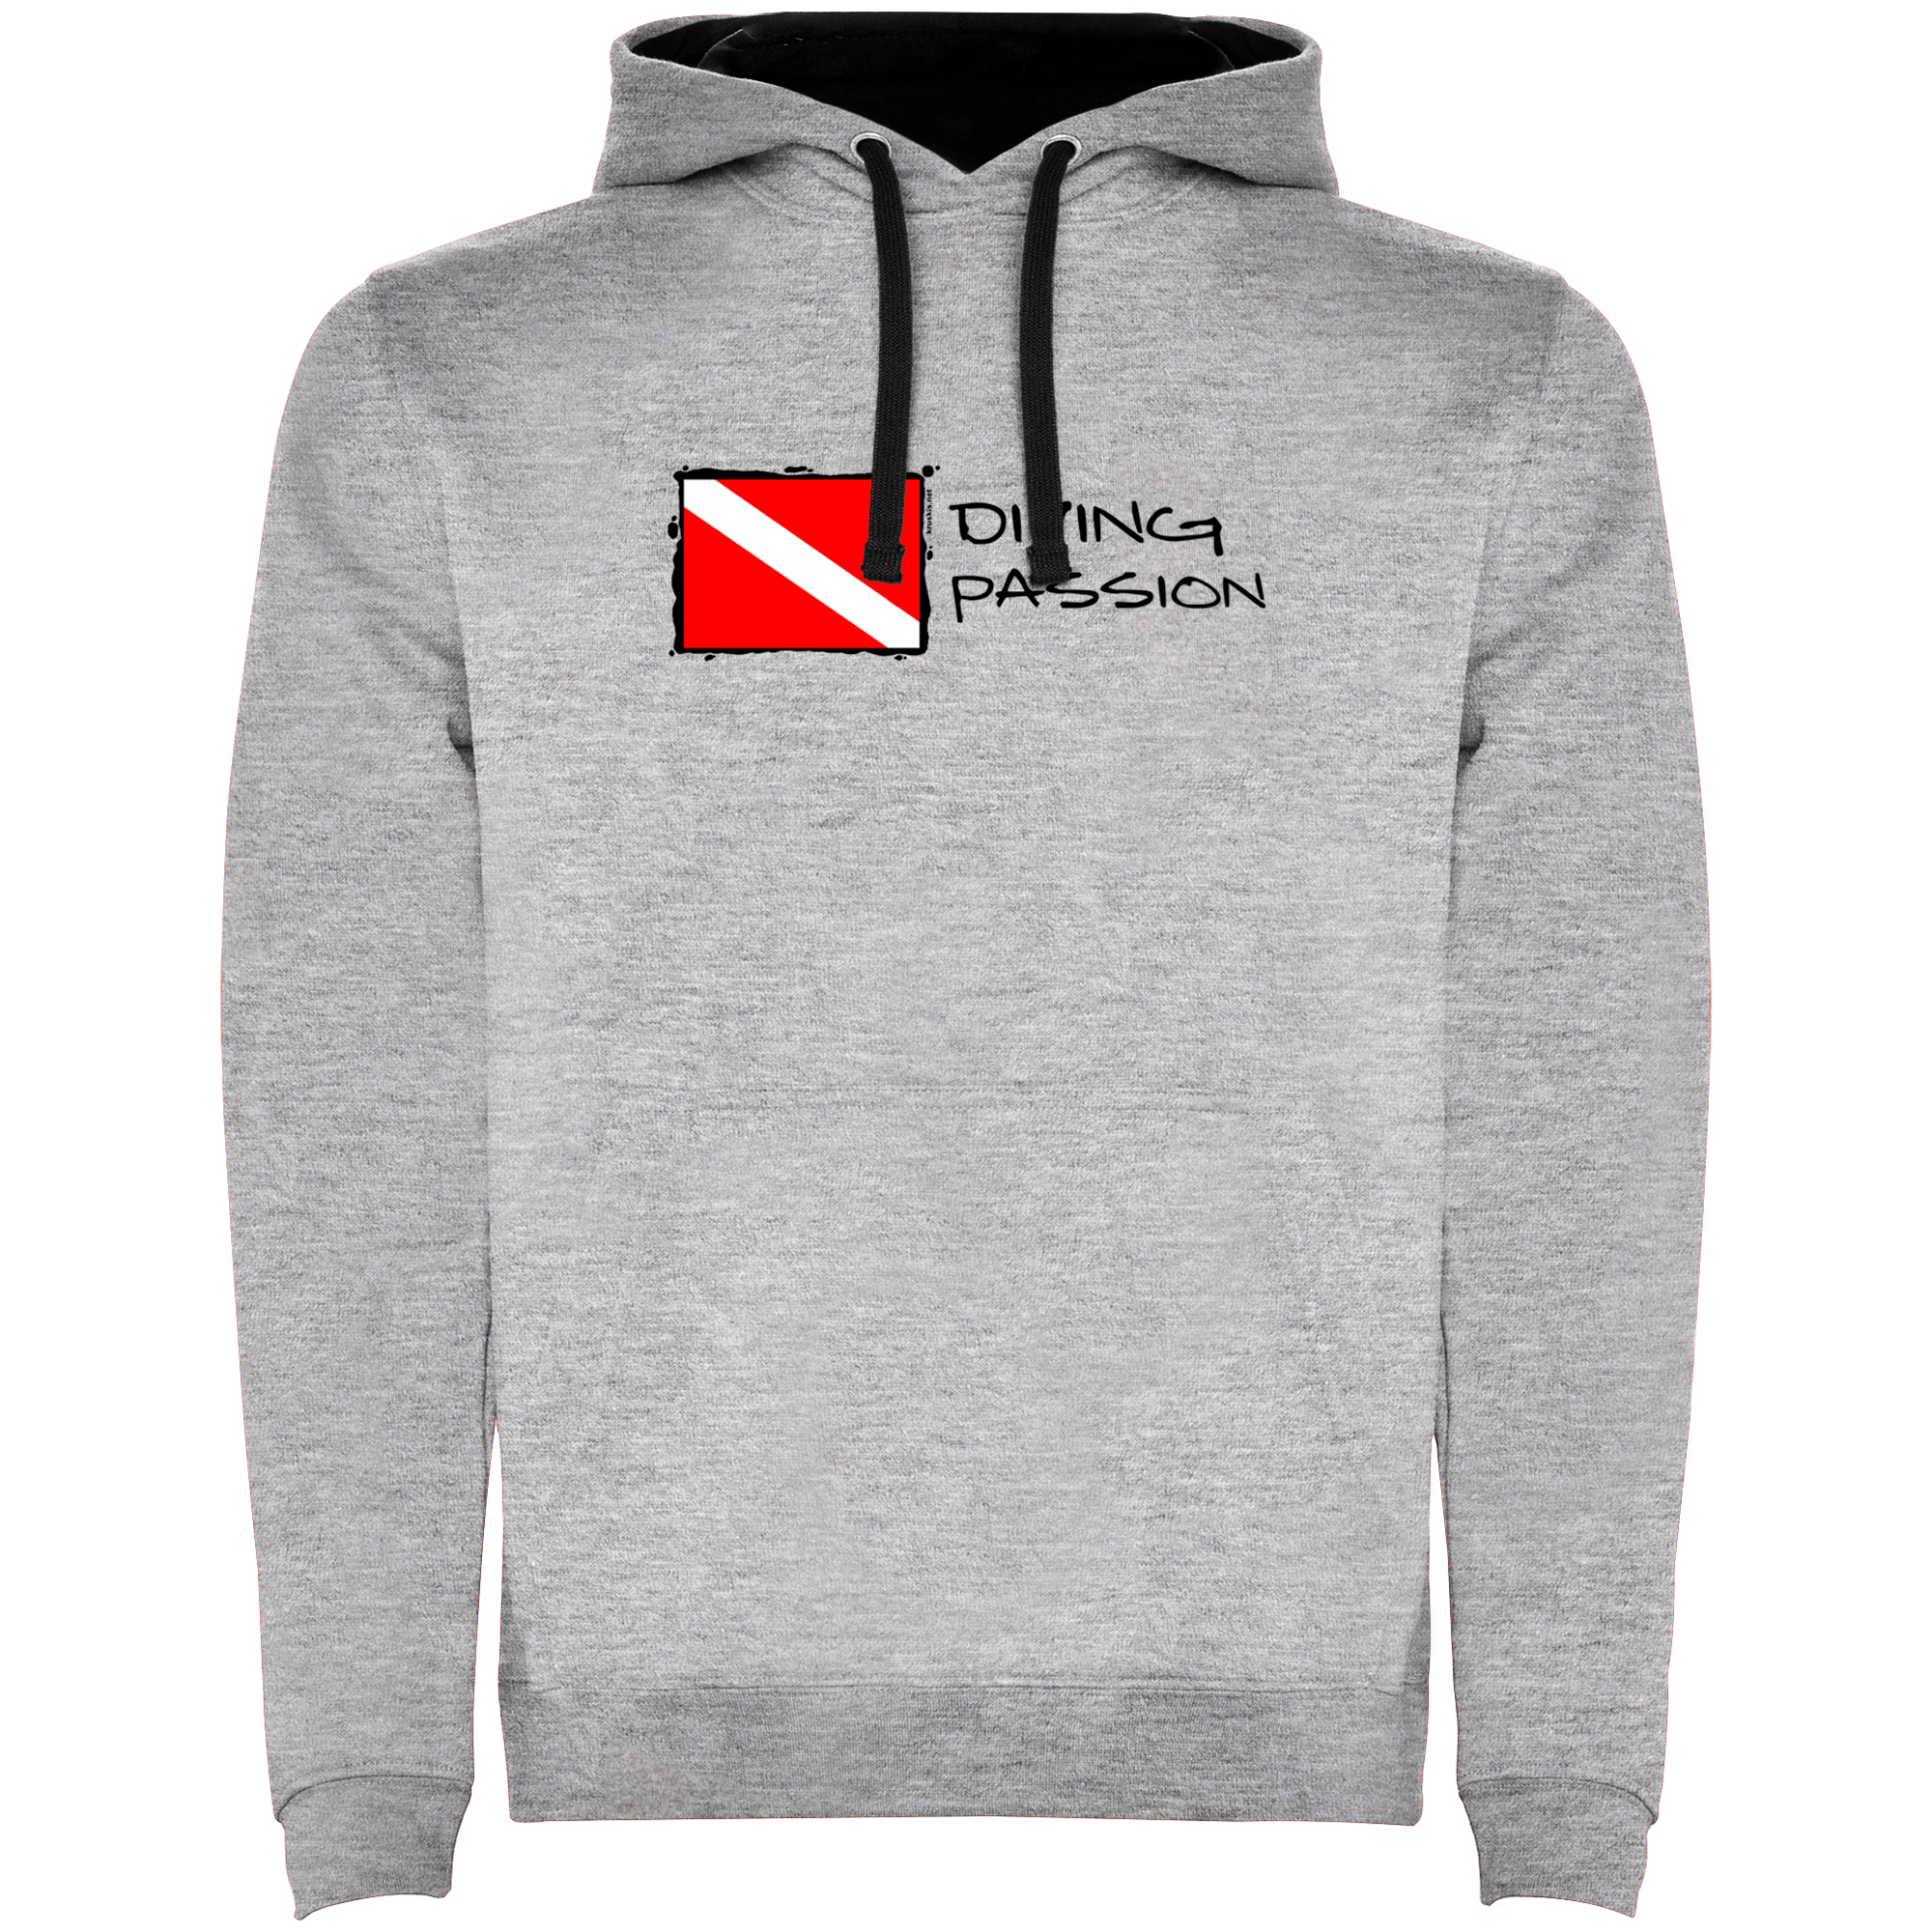 Sudadera Buceo Diving Passion Unisex